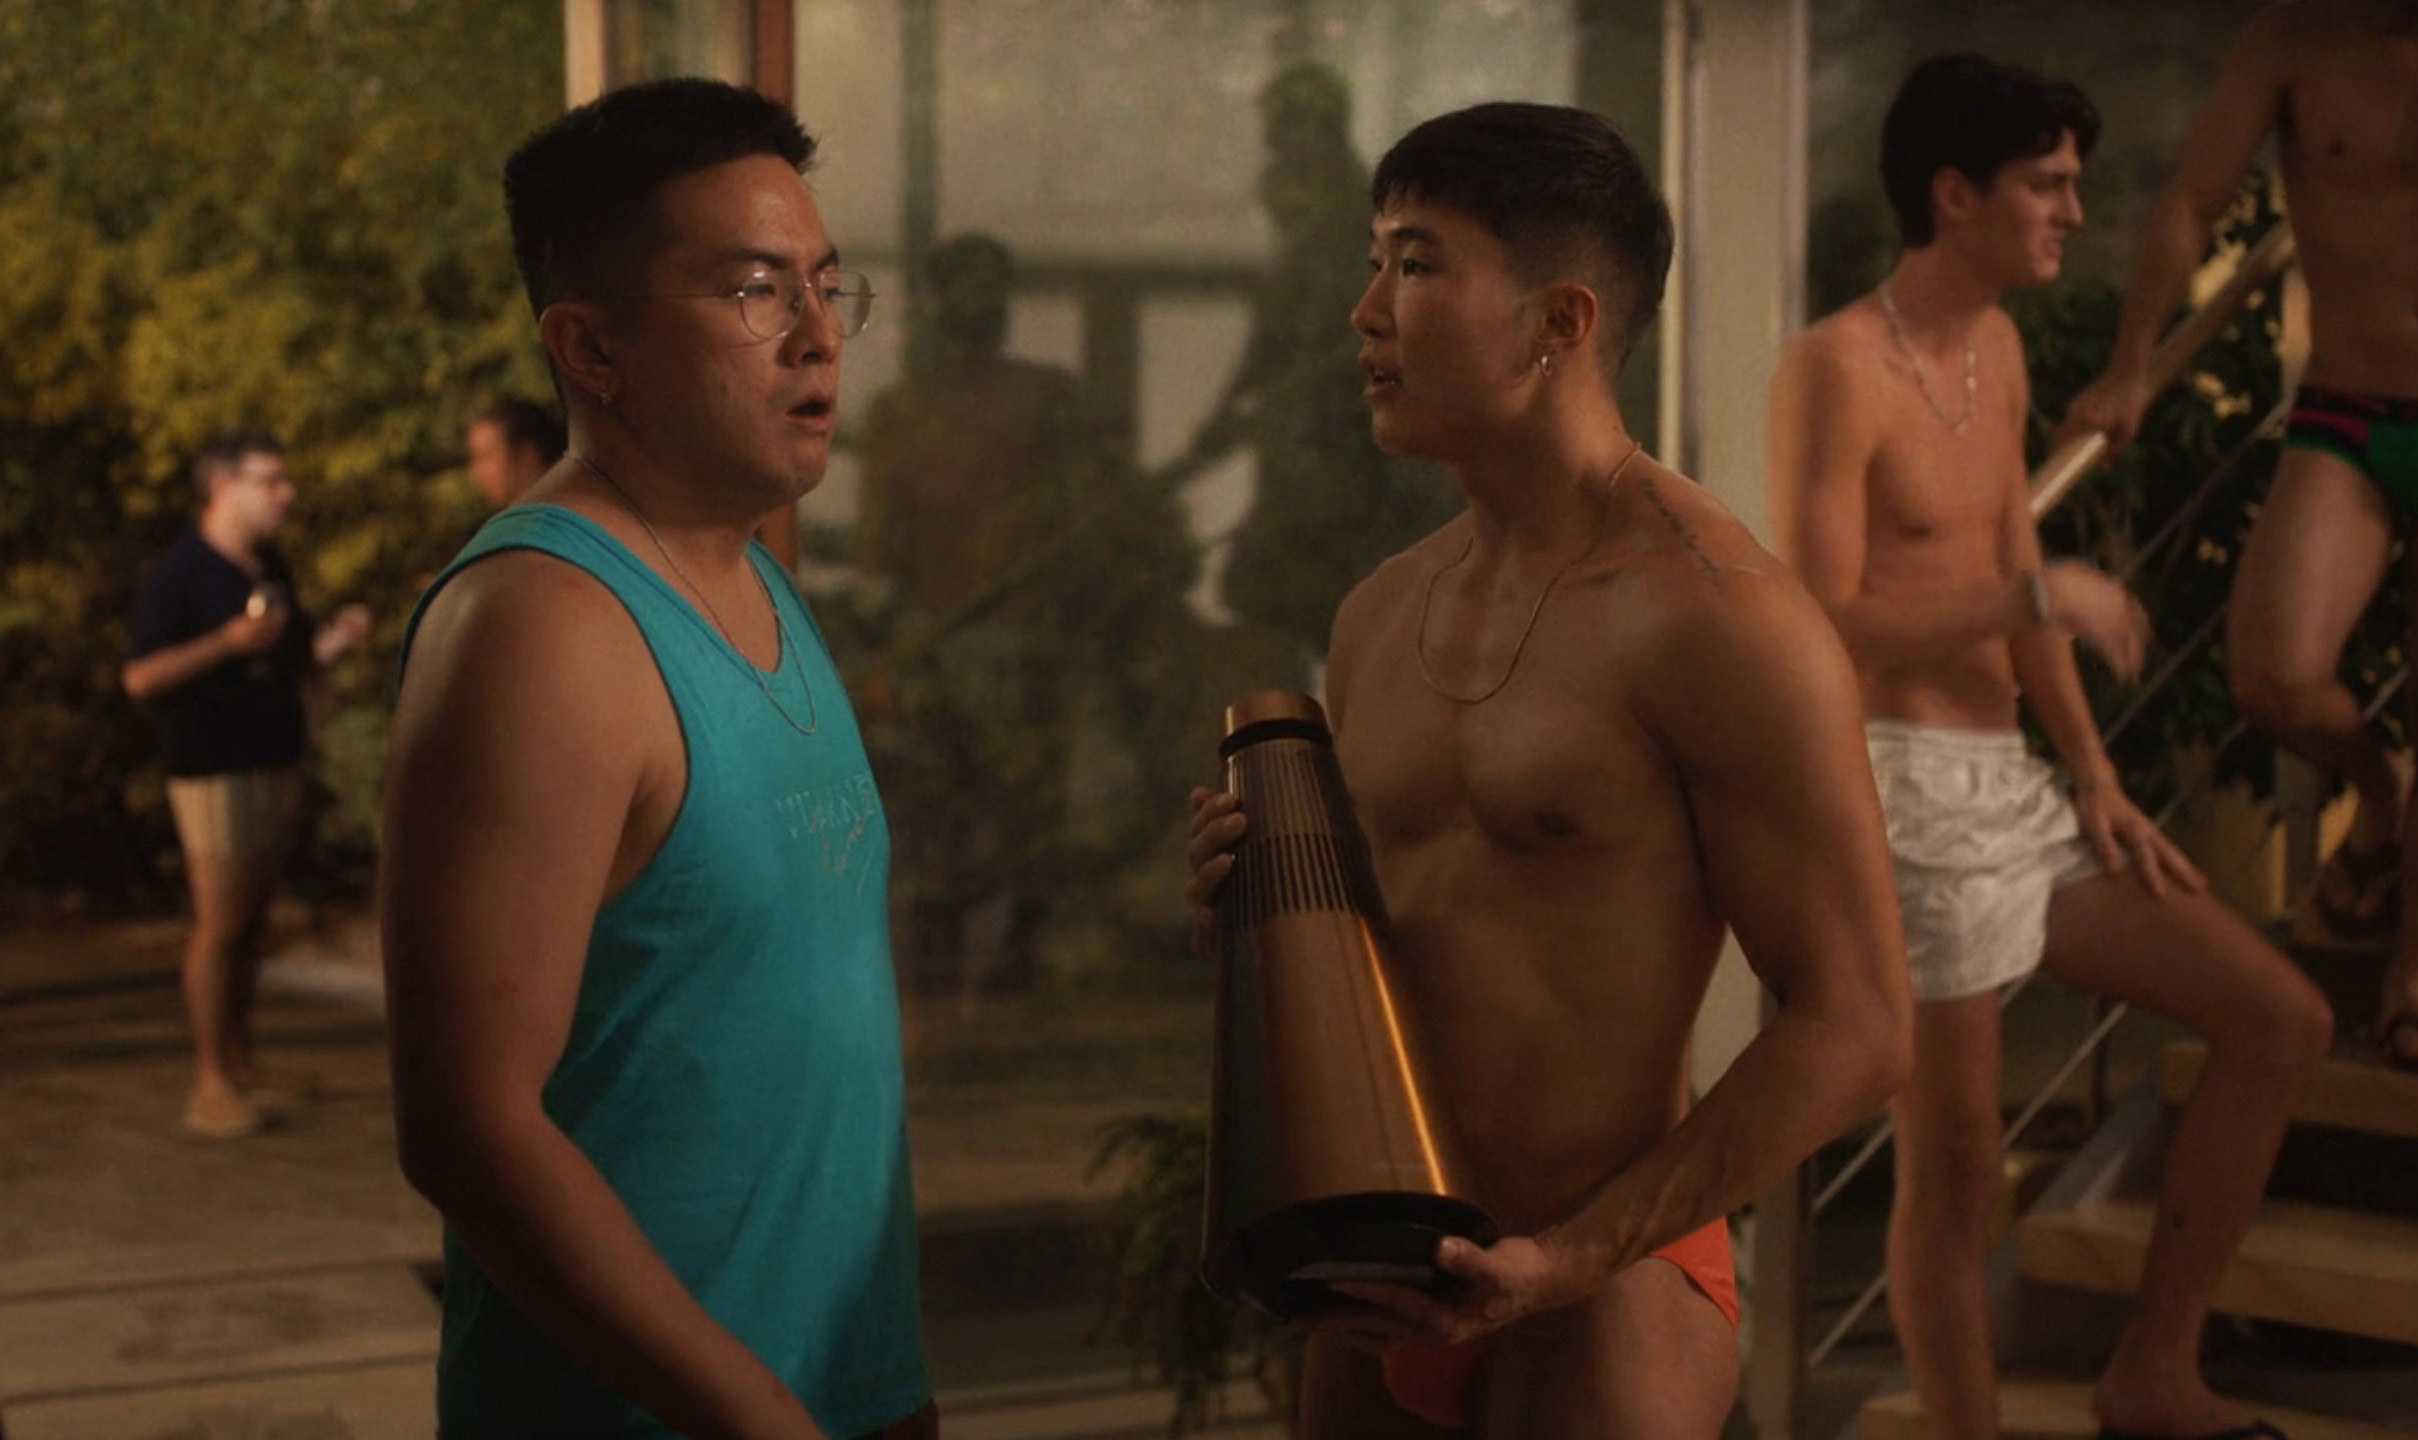 Men in briefs, trunks, and shirts standing around together talking